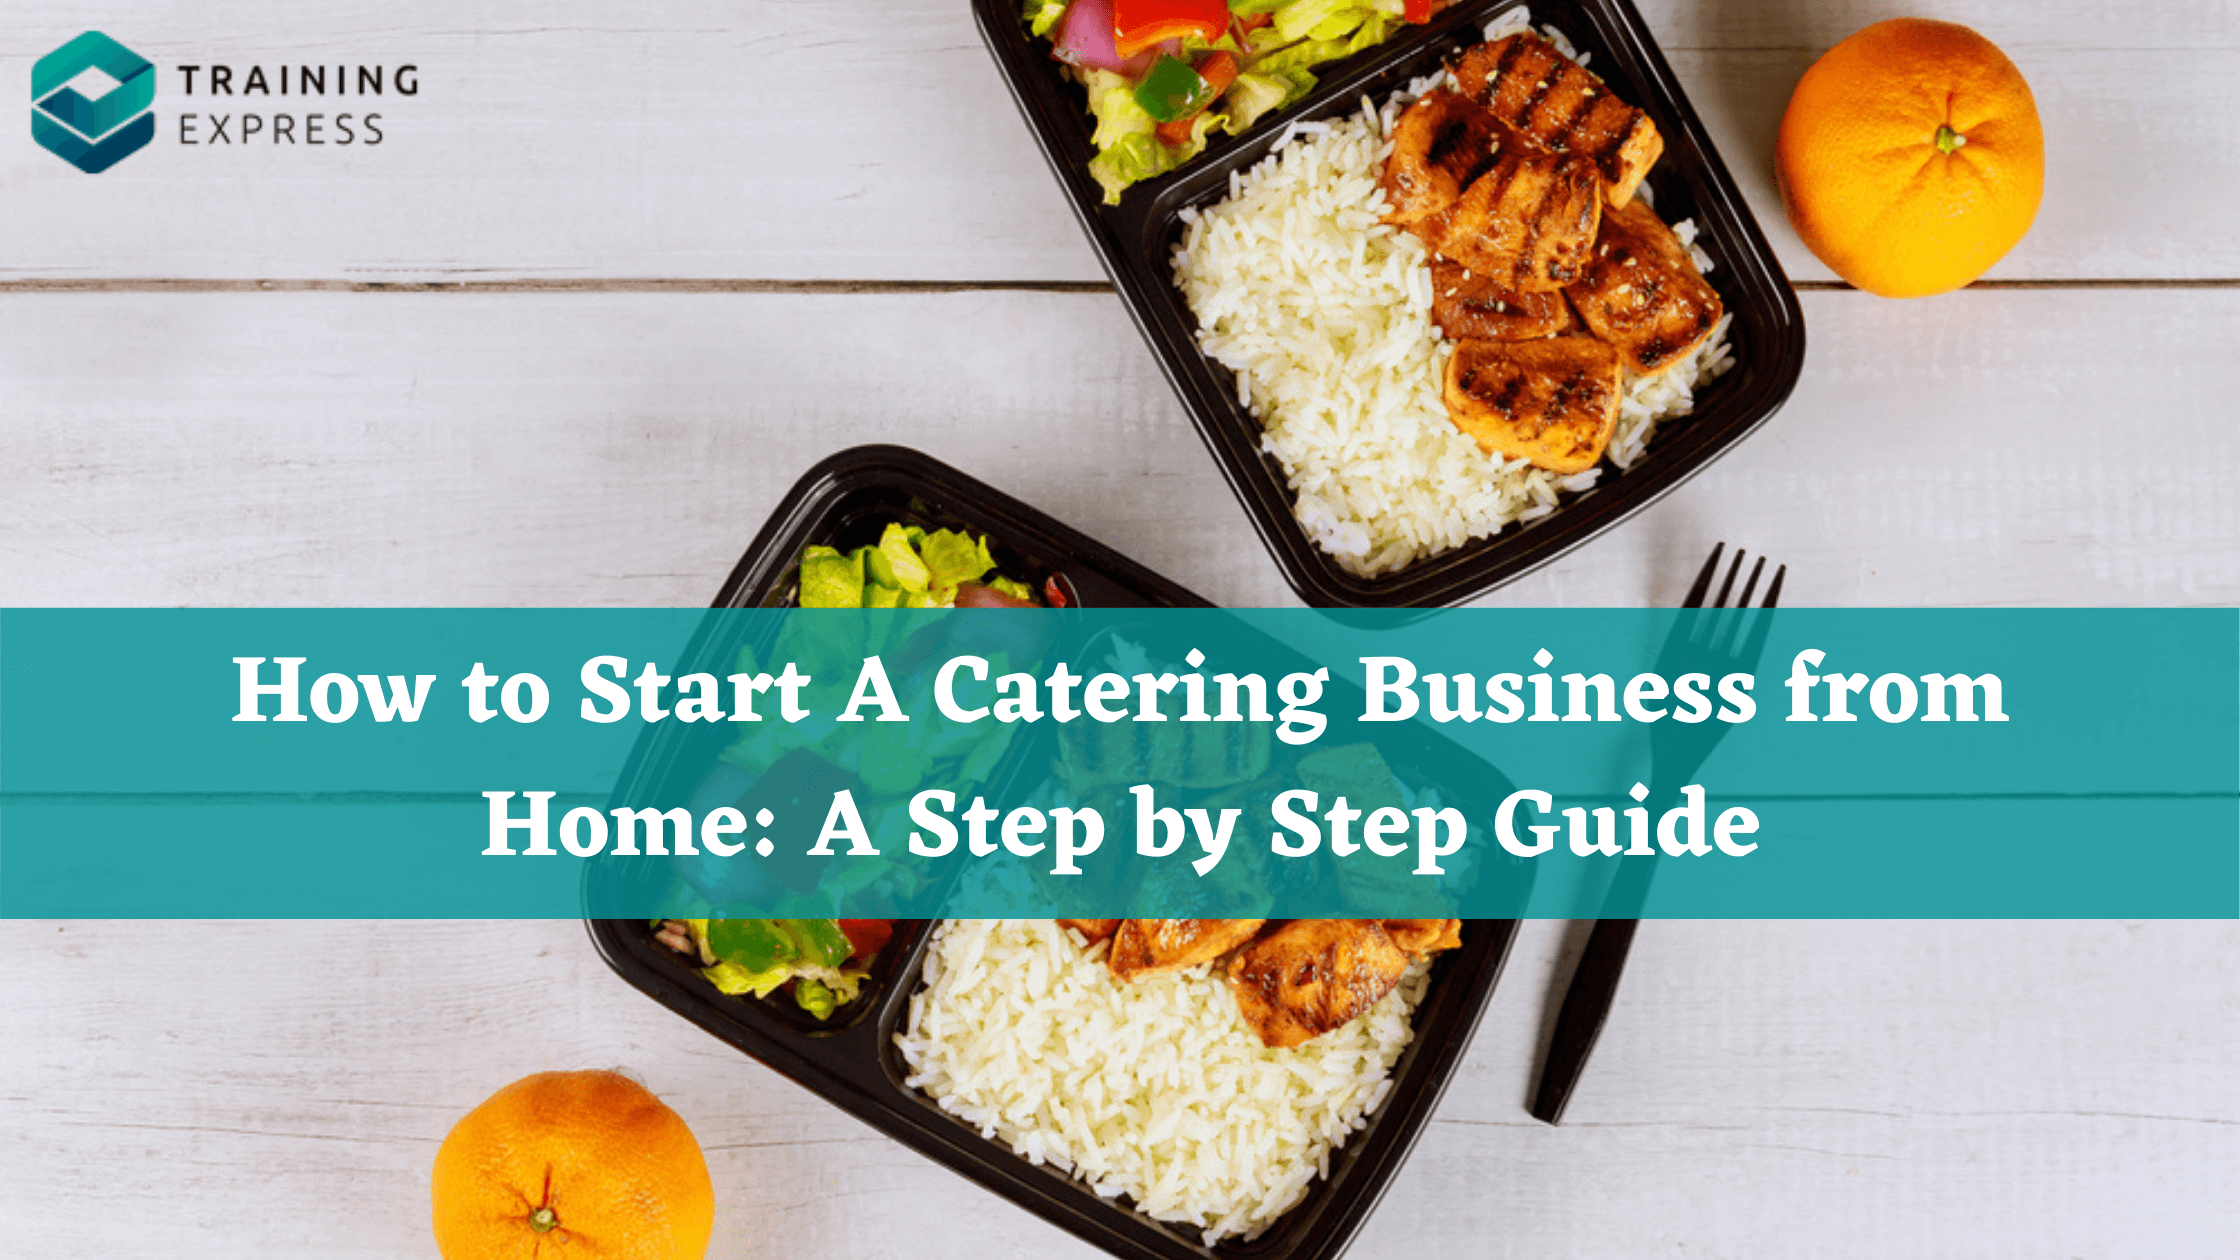 Catering Business from Home